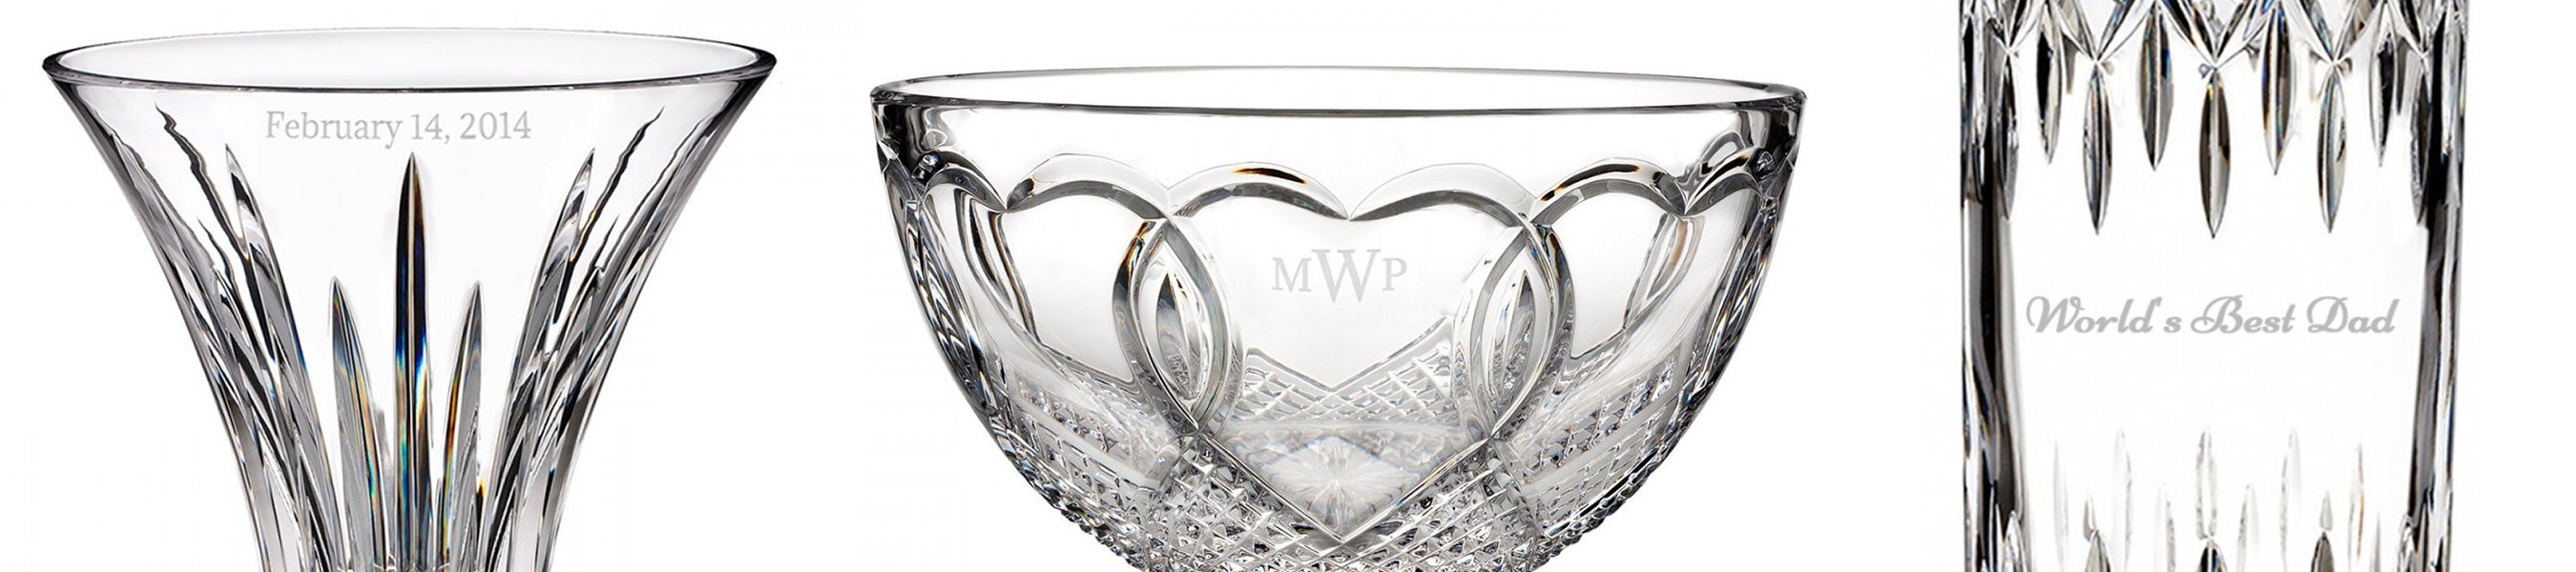 11 Lovable Marquis by Waterford Sheridan Flared 11 Crystal Vase 2024 free download marquis by waterford sheridan flared 11 crystal vase of engraved crystal vases clocks frames bowls waterforda us for waterford engraved gifts home decor